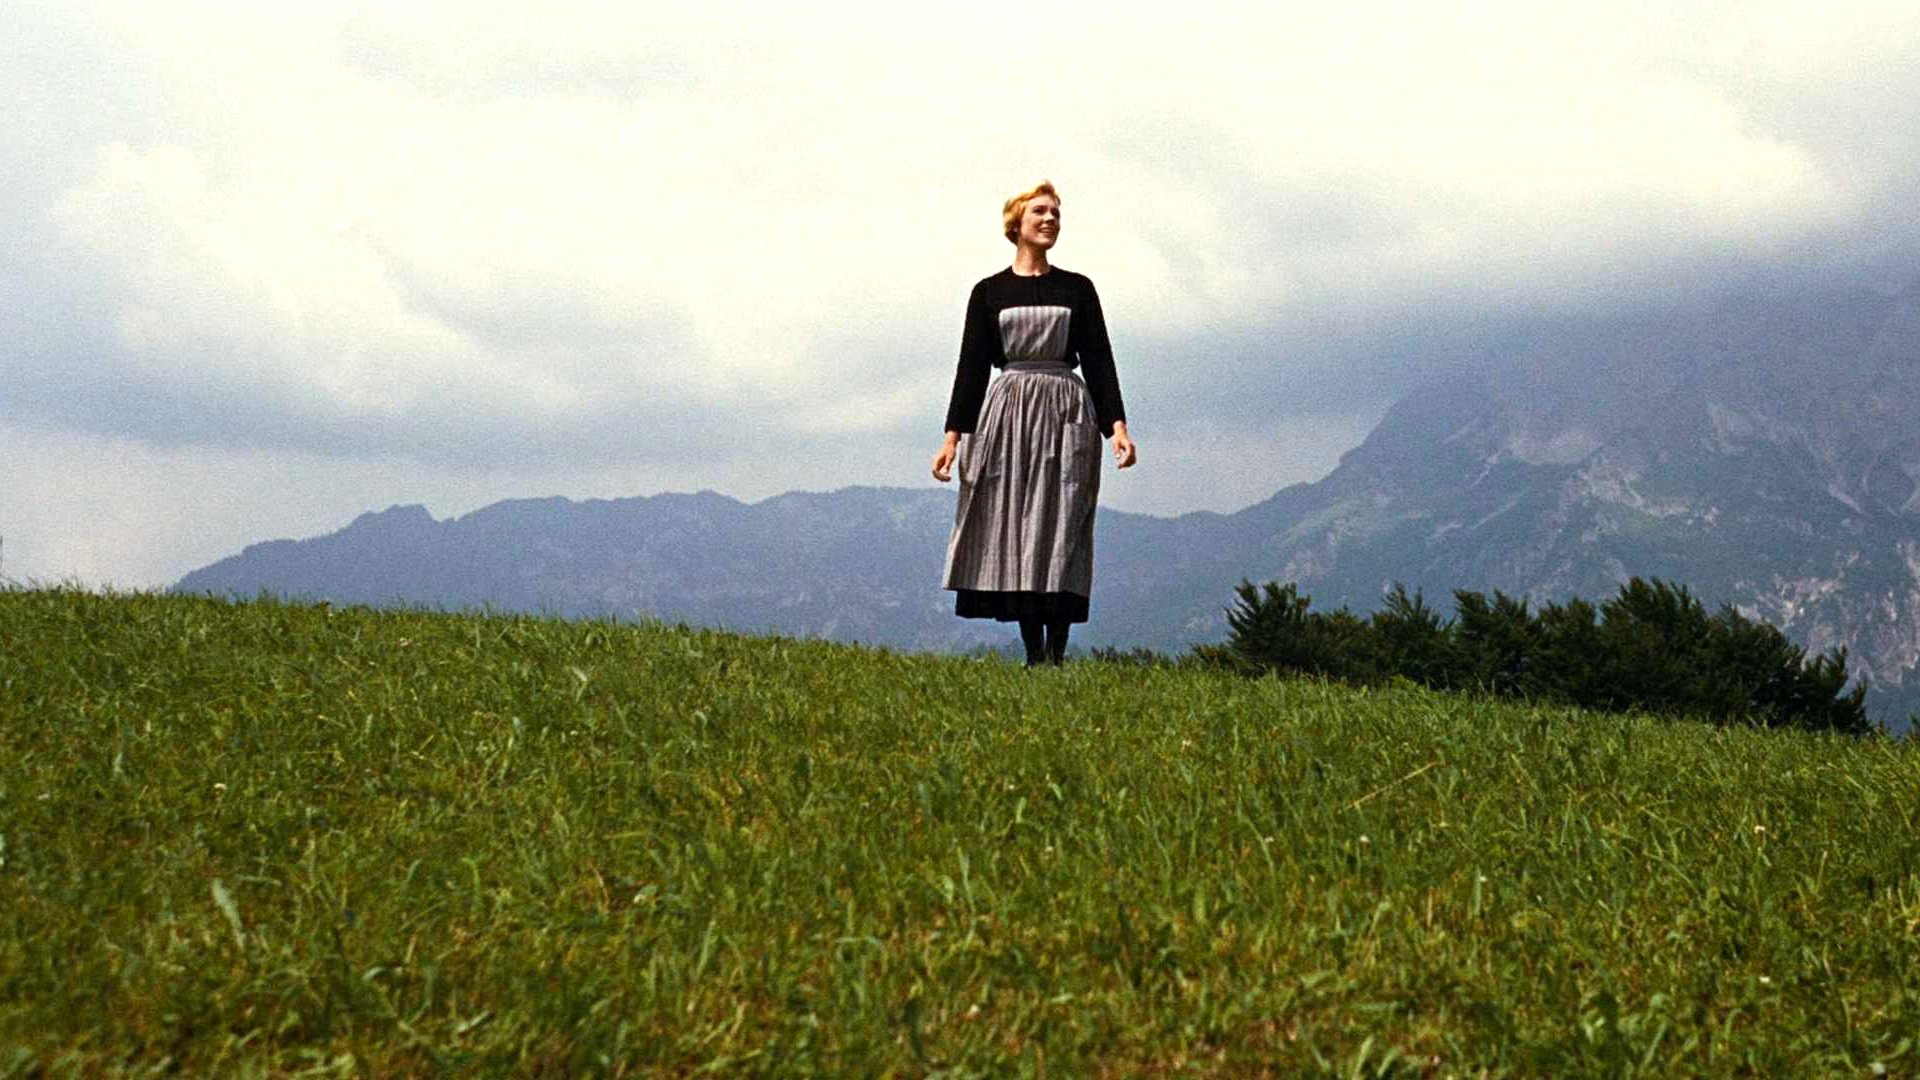 The Sound Of Music HD Wallpaper Background Image